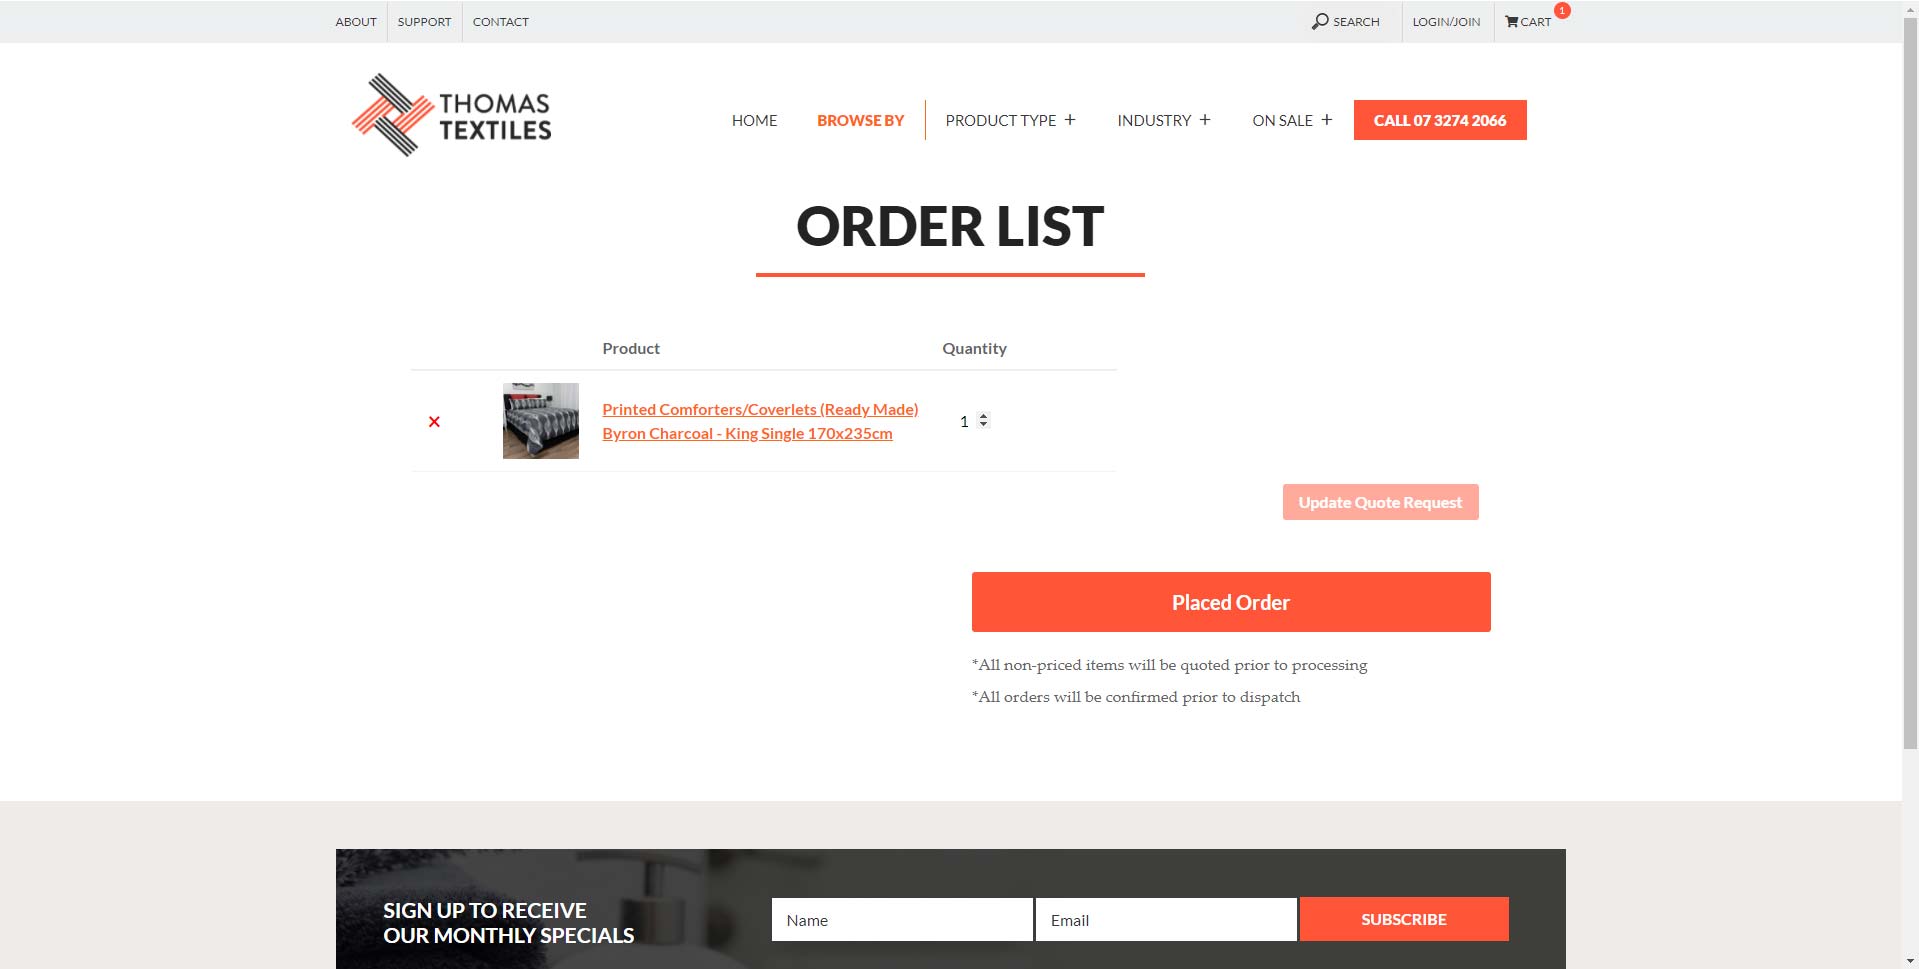 6. Review and confirm your order is correct then click Confirm order